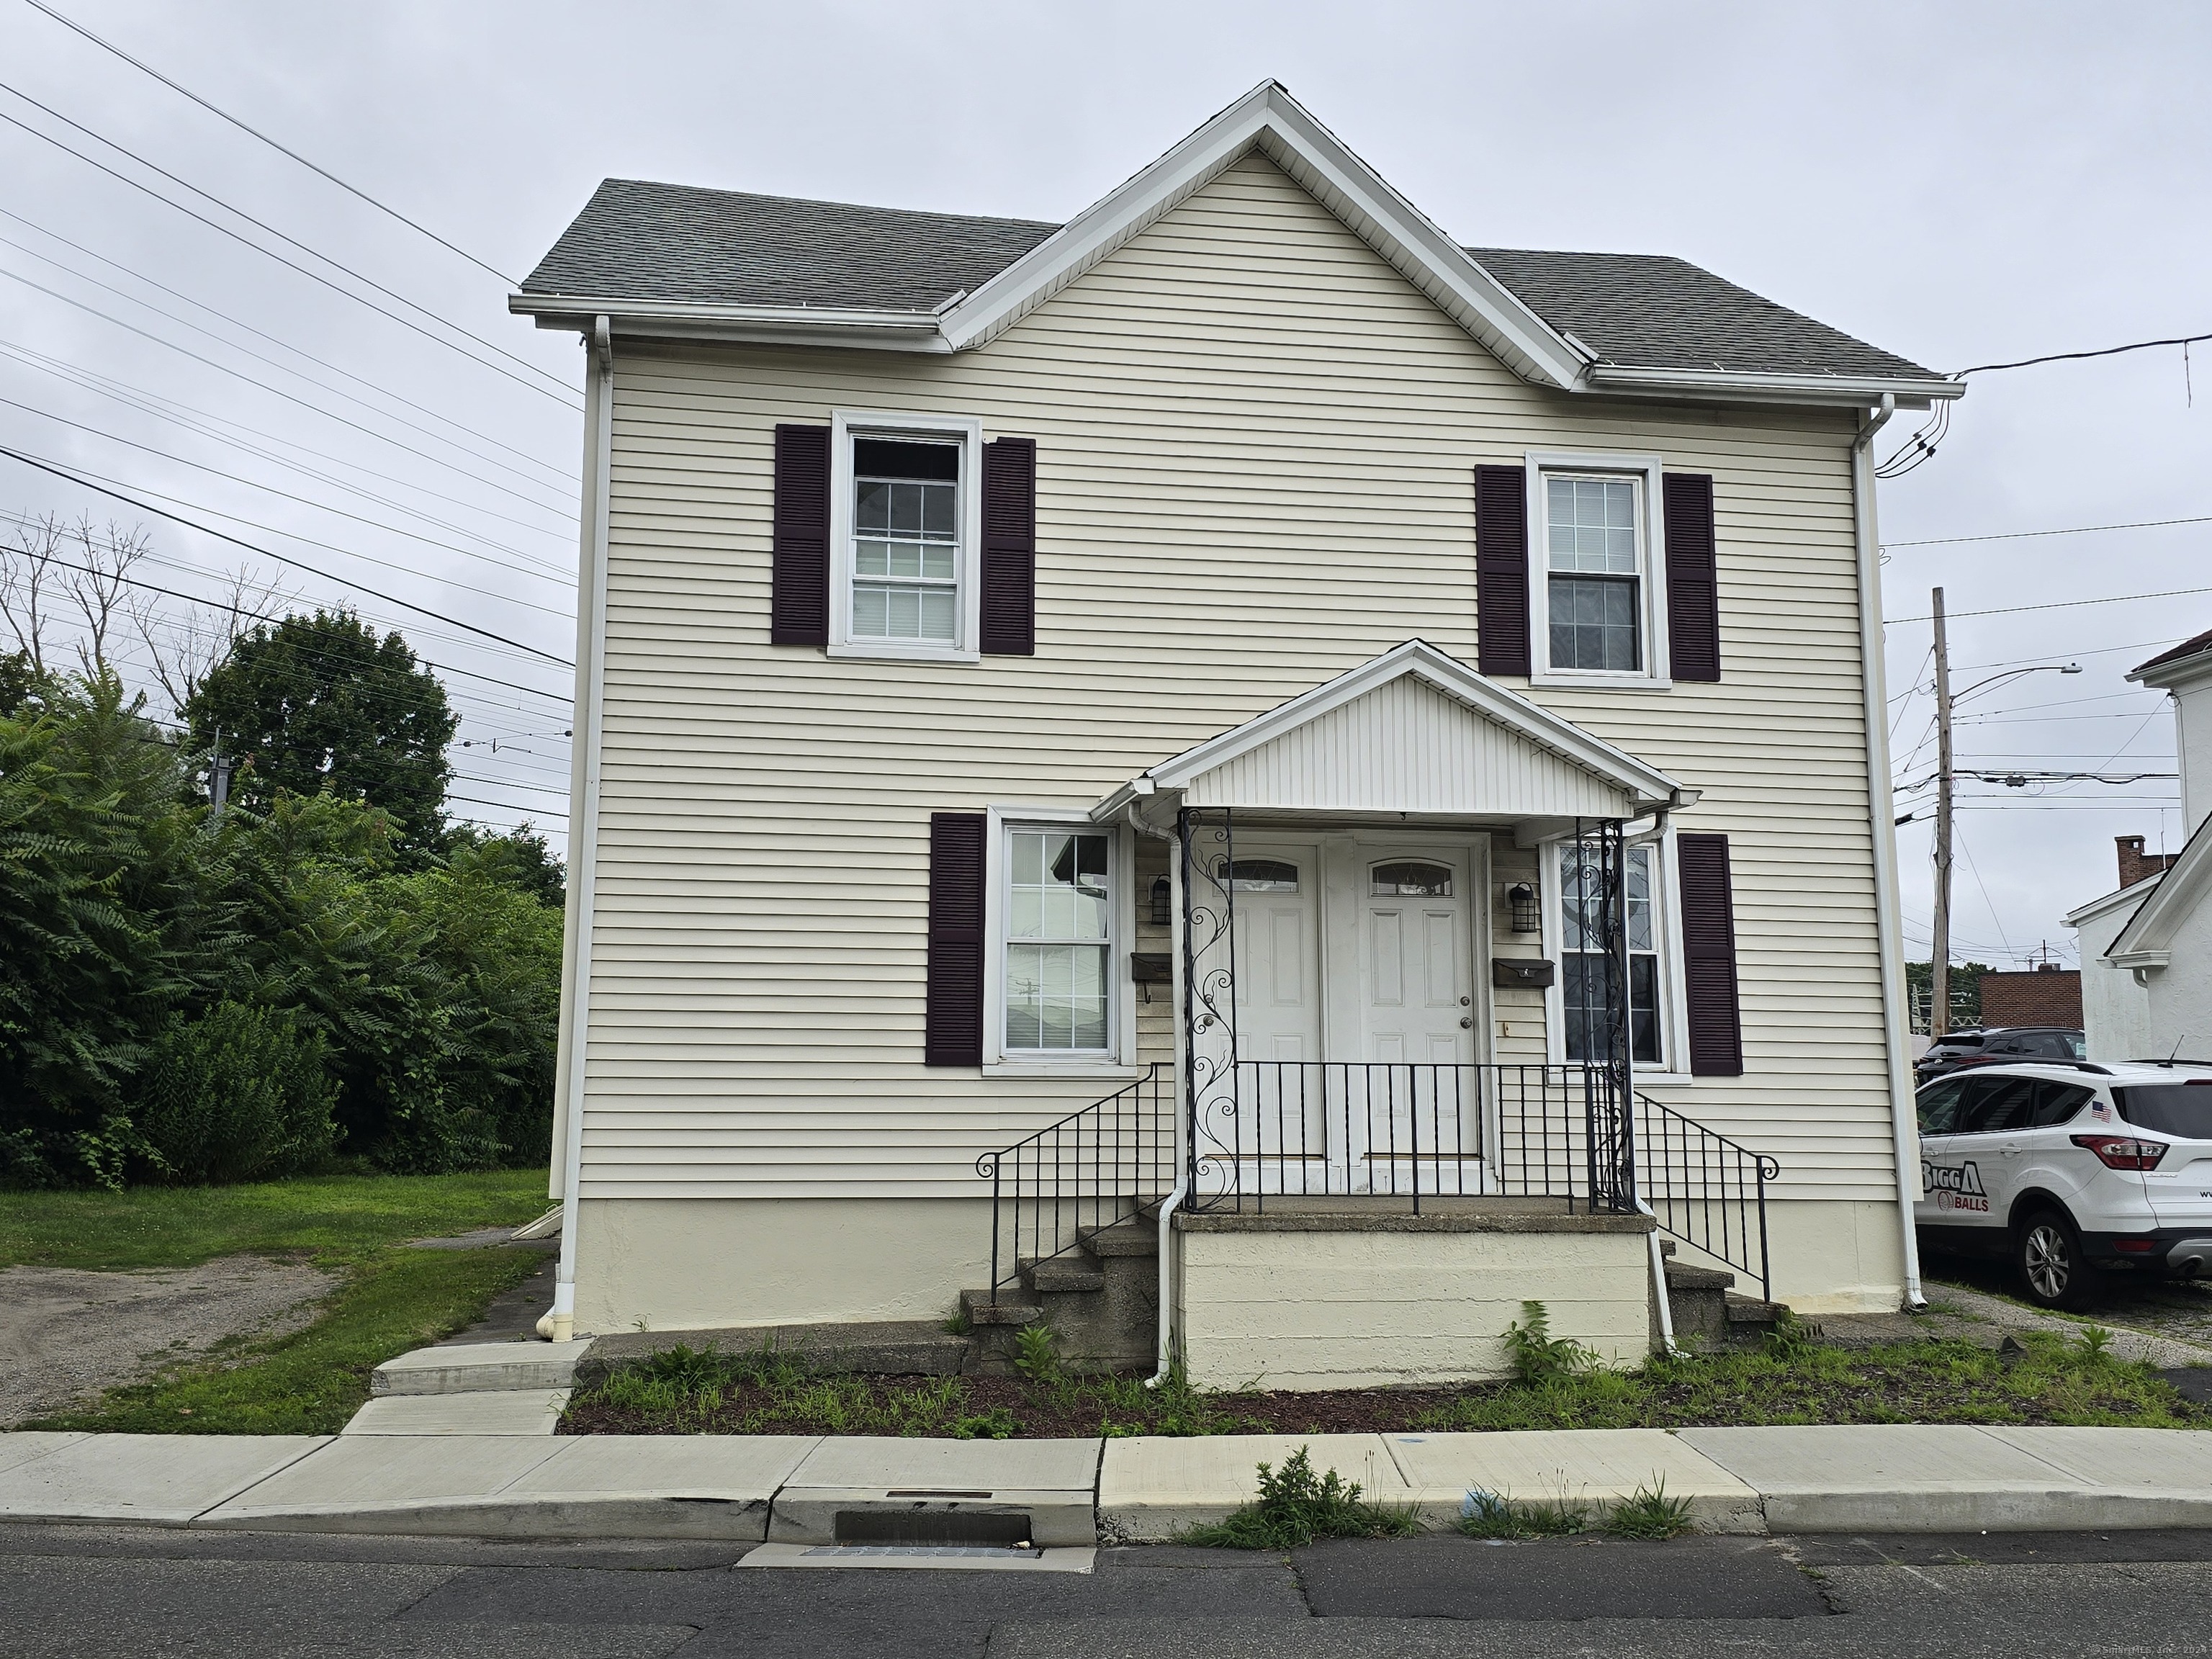 Rental Property at 7 Prospect Street, Milford, Connecticut - Bedrooms: 2 
Bathrooms: 1 
Rooms: 5  - $2,350 MO.